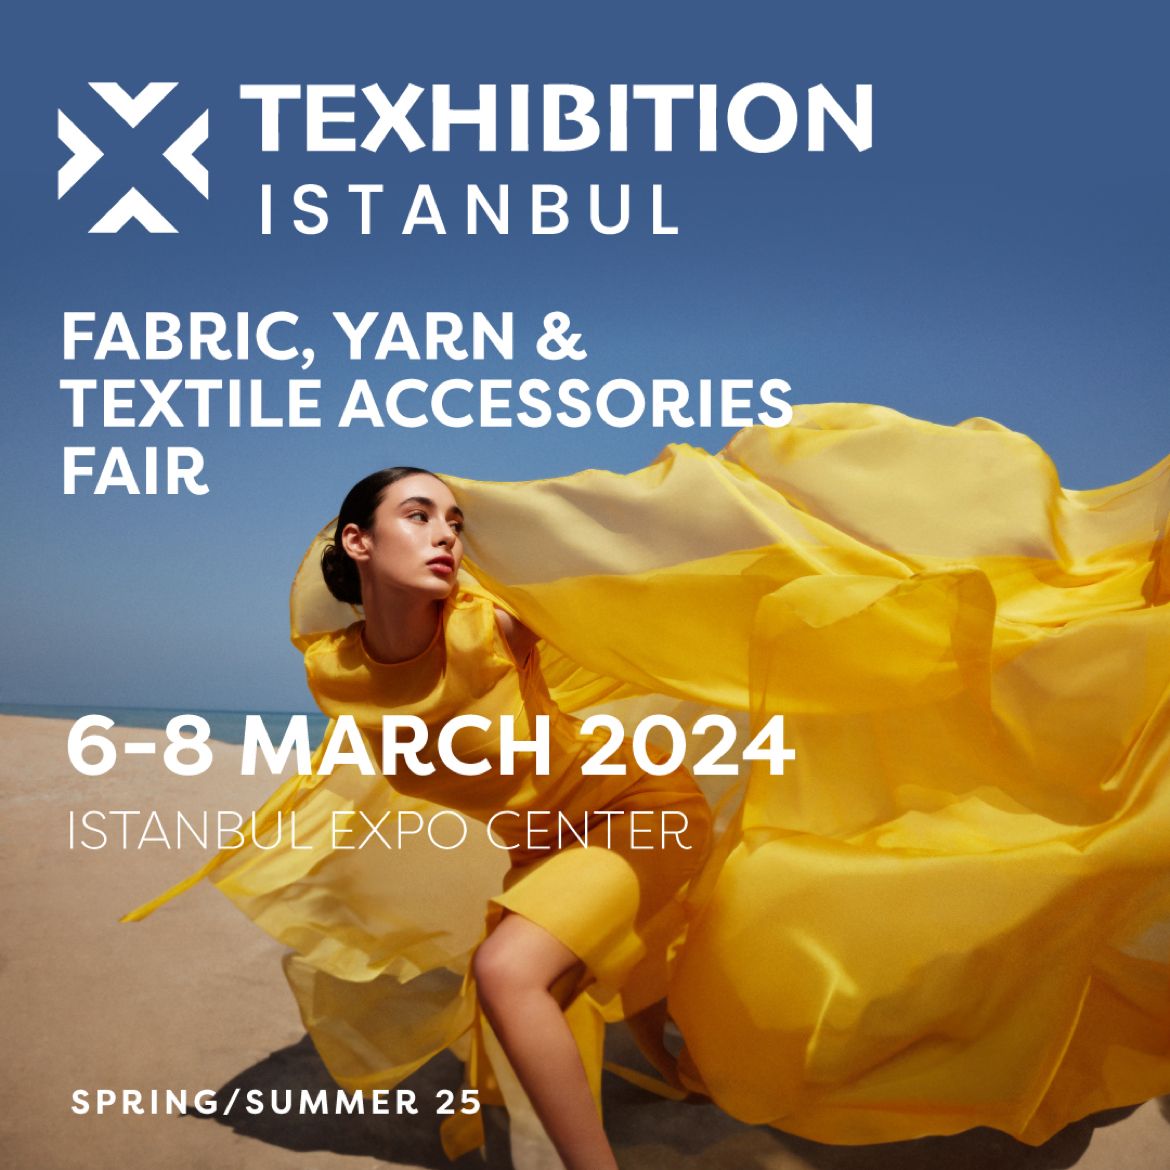 TEXHIBITION ISTANBUL FABRIC AND TEXTILE ACCESSORIES FAIR SUMMER 2024